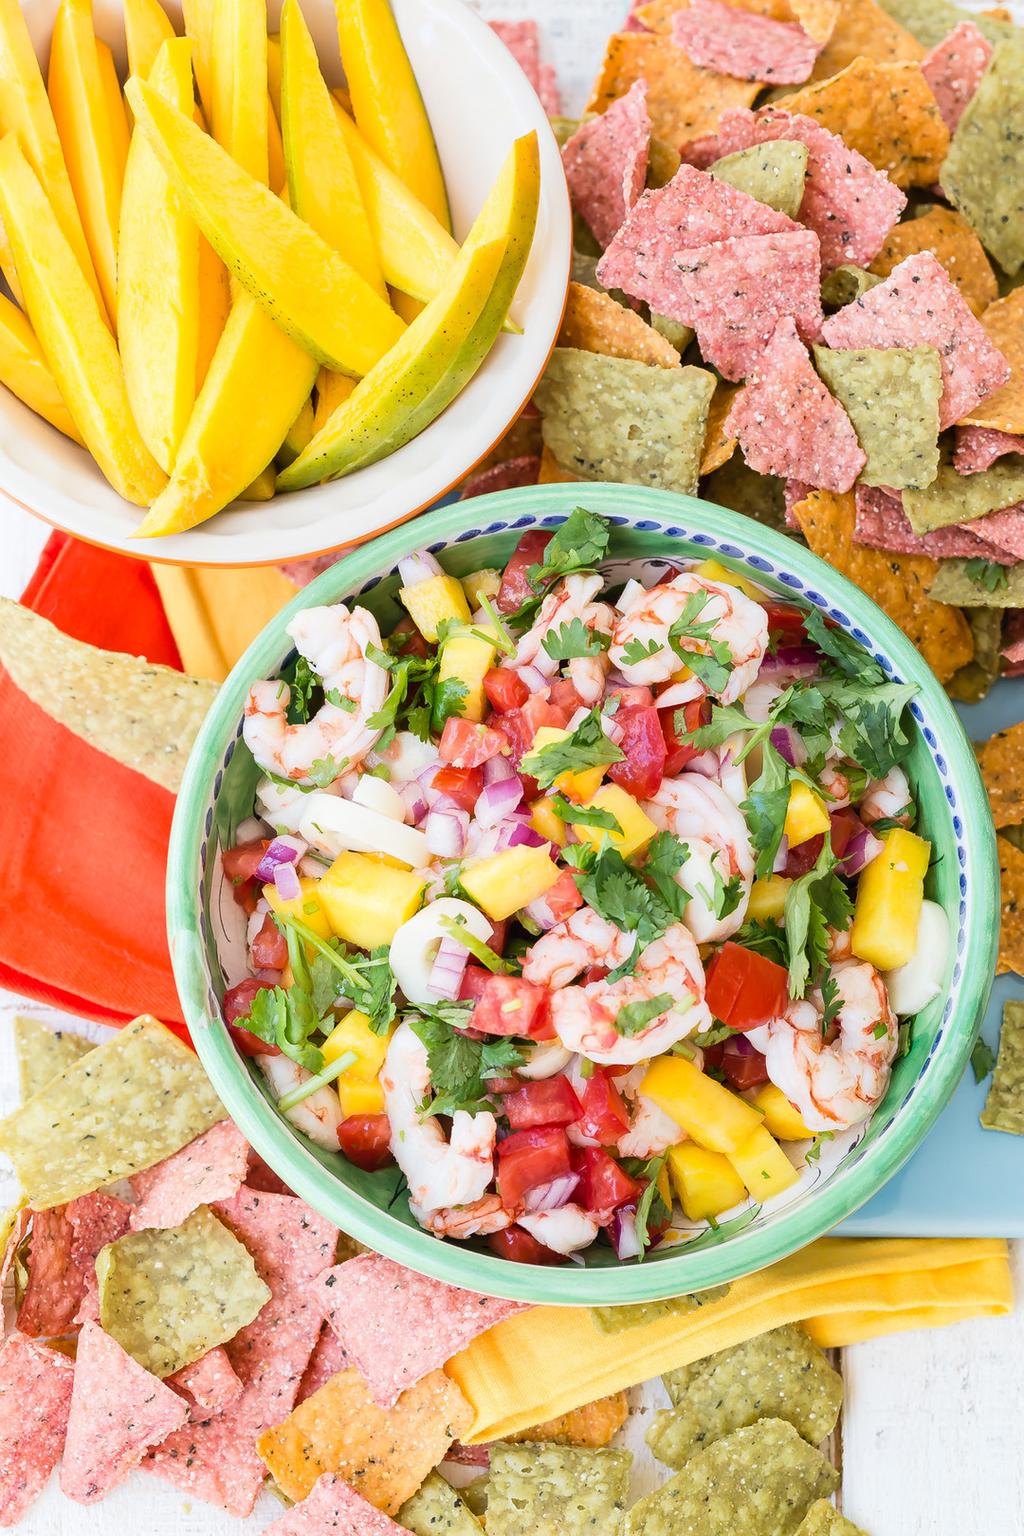 mango shrimp ceviche recipe Produce 1 red onion 2 tomatoes 1 fresh lime, juiced 1 mango 1/4 cup chopped cilantro Meat 1 pound large shrimp, cooked Prep time: 20 minutes Serves 6-8 Packaged Items 1